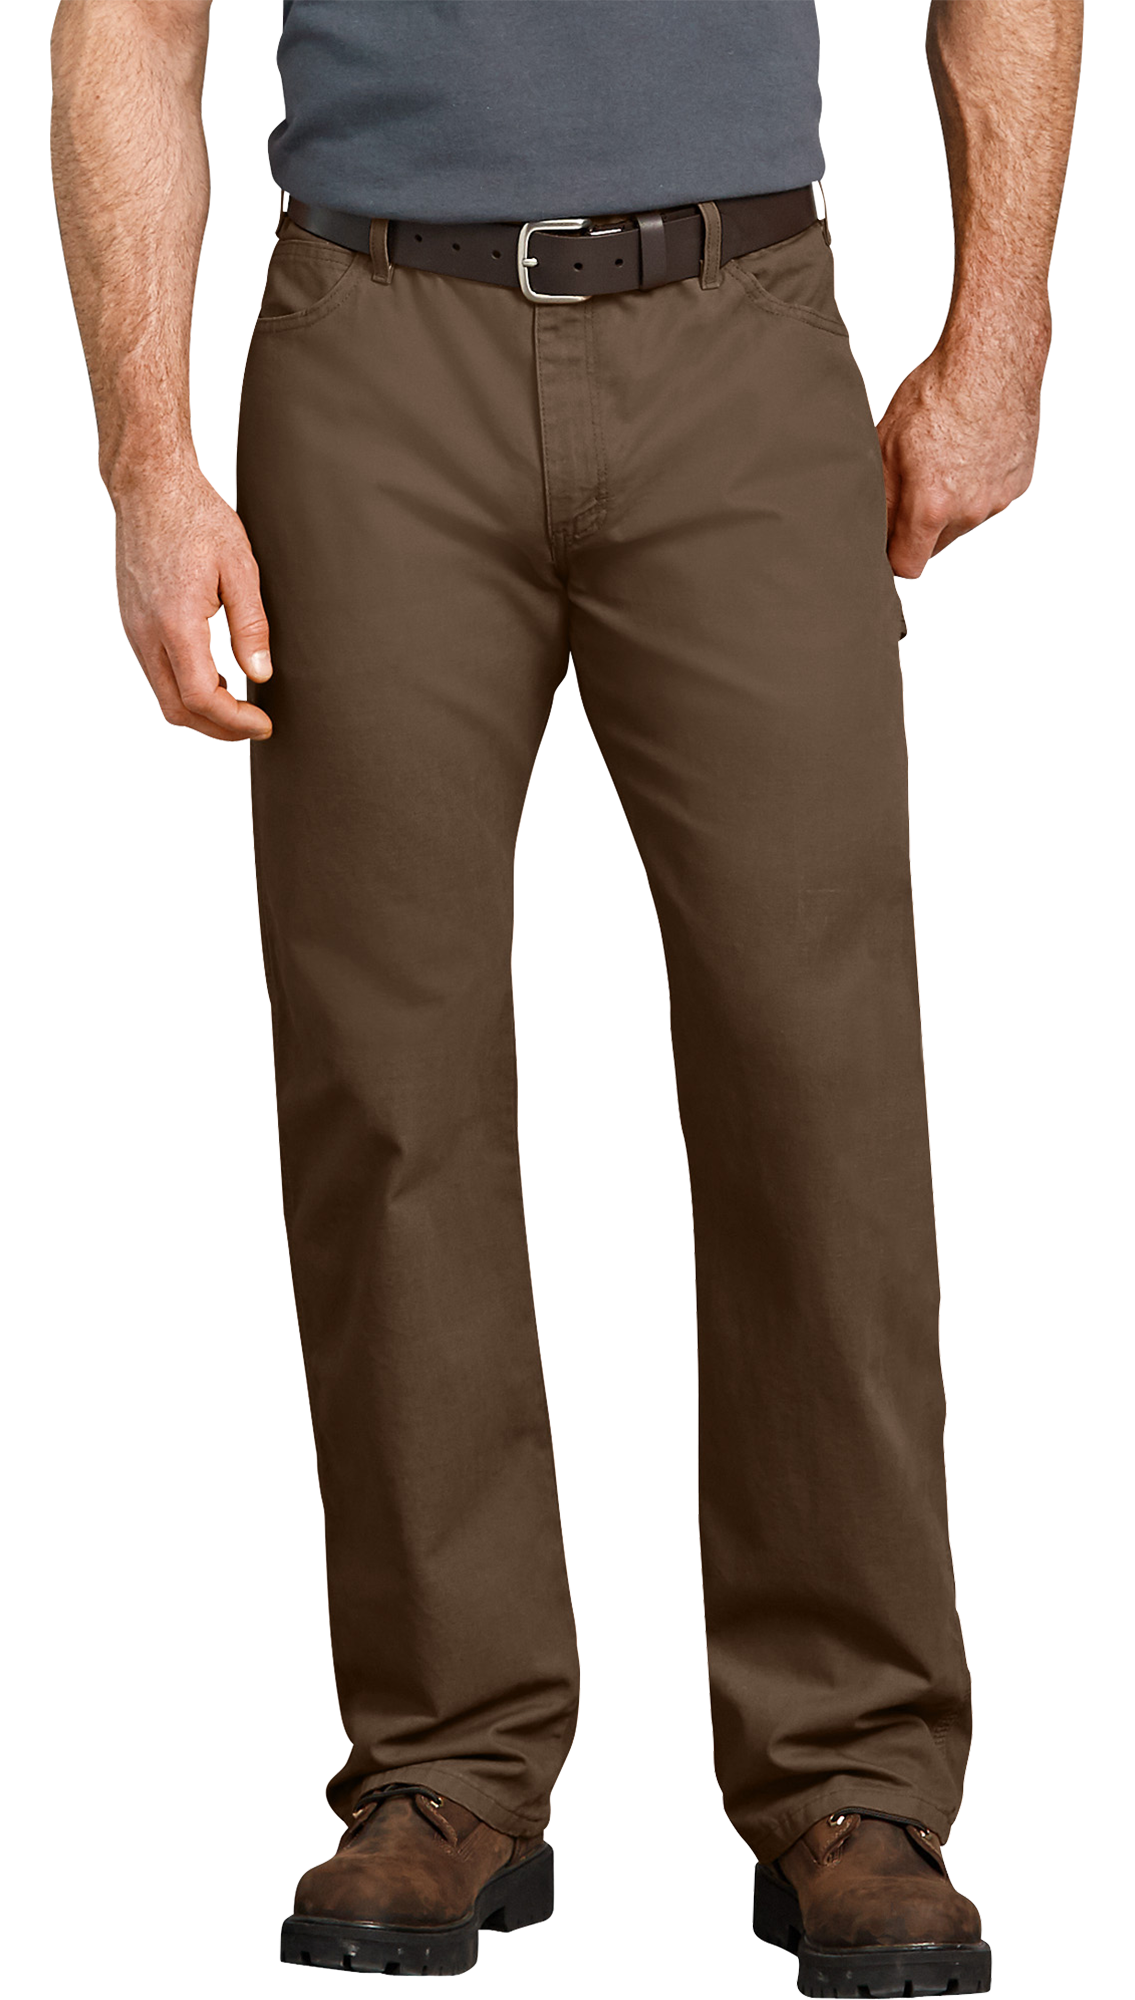 Dickies Relaxed-Fit Straight-Leg Carpenter Duck Jeans for Men - Rinsed Timber - 38x34